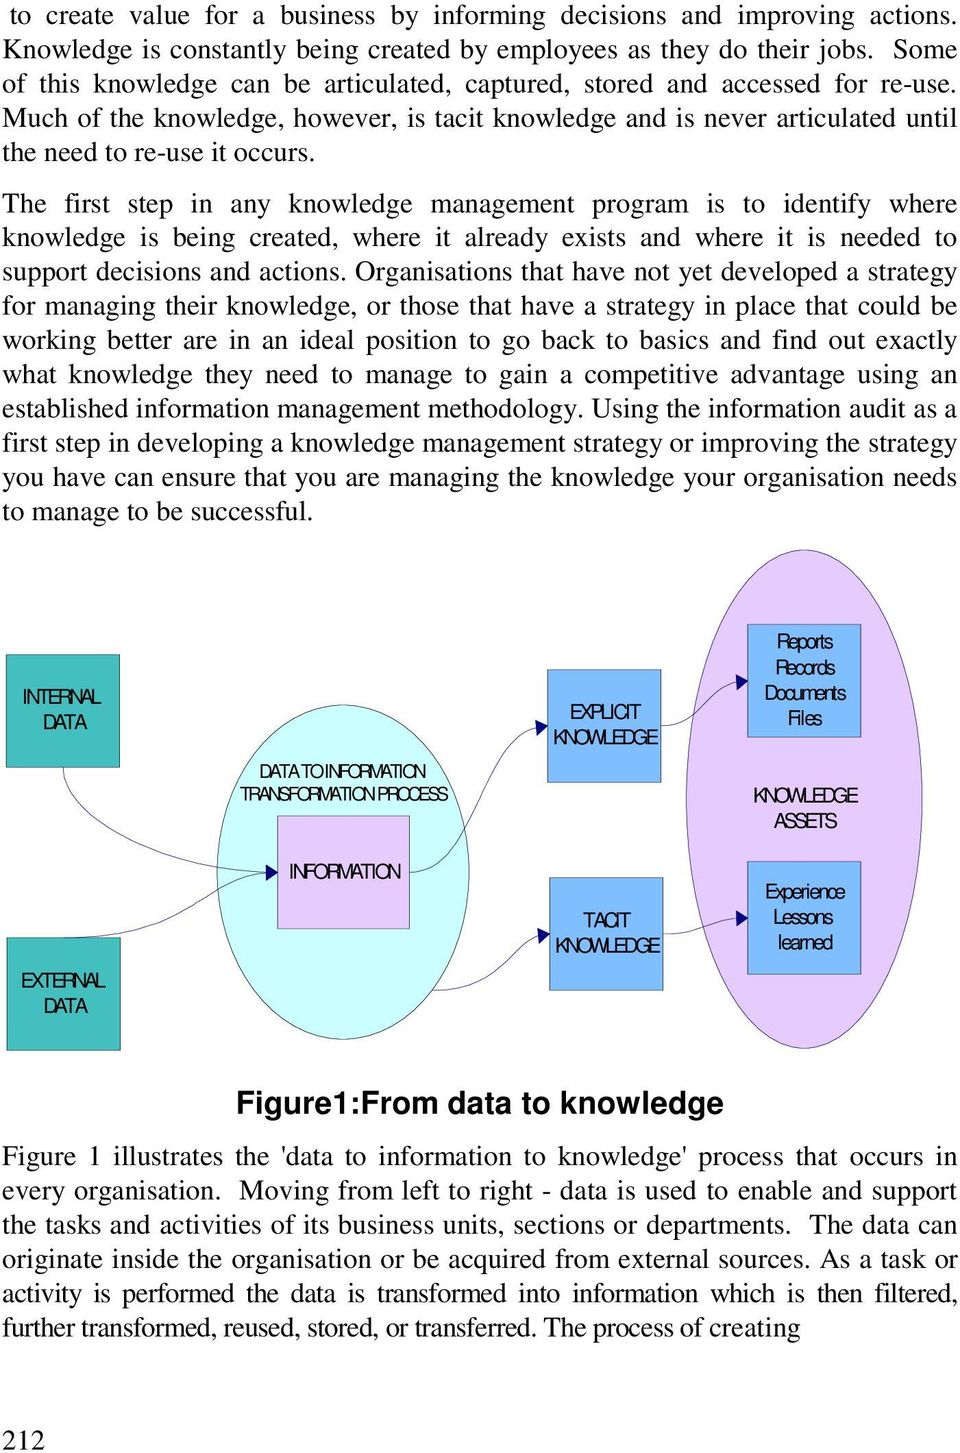 The first step in any knowledge management program is to identify where knowledge is being created, where it already exists and where it is needed to support decisions and actions.